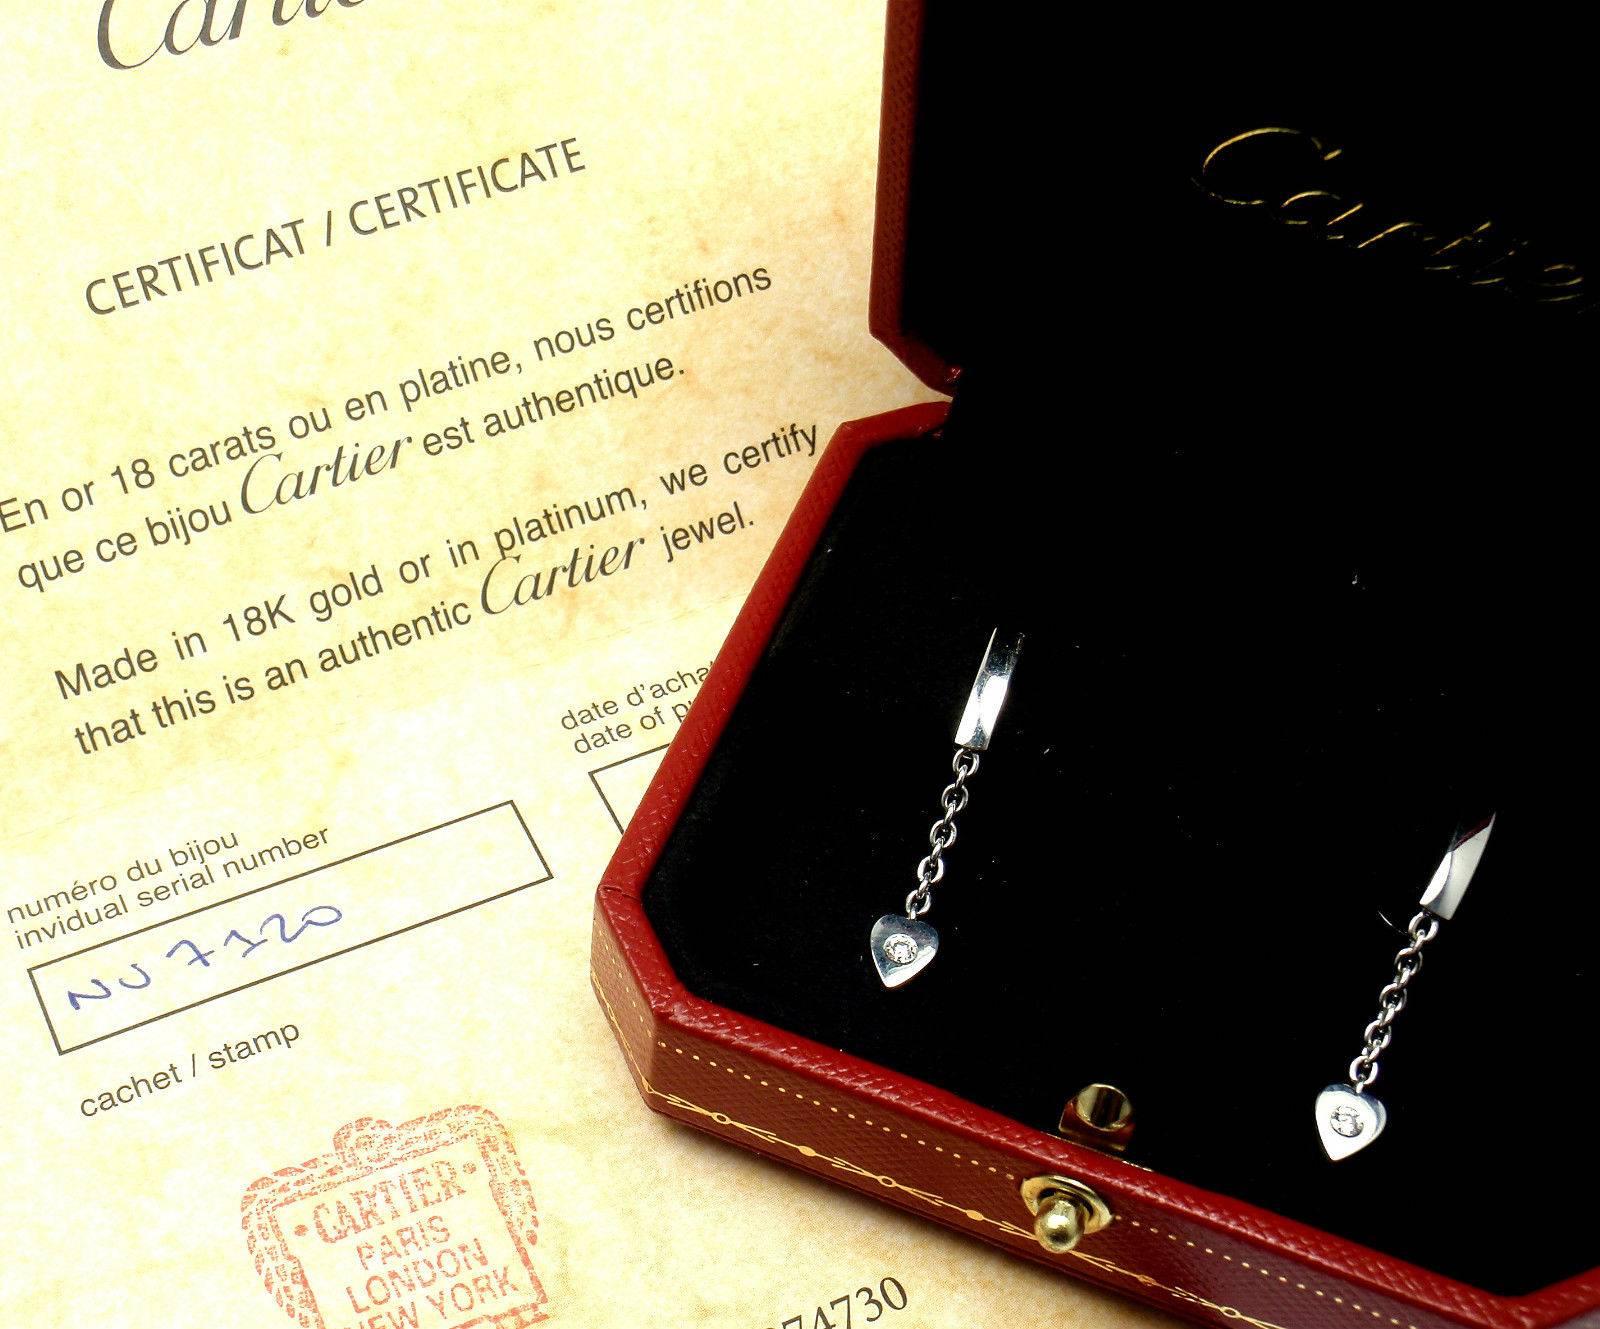 18k White Gold Diamond Heart Drop Dangle Earrings by Cartier.
With 2 Round brilliant cut diamonds total weight approx .15ct.
Diamonds VVS1 clarity, E color
These earrings are in mint condition and come with original Cartier box and Cartier